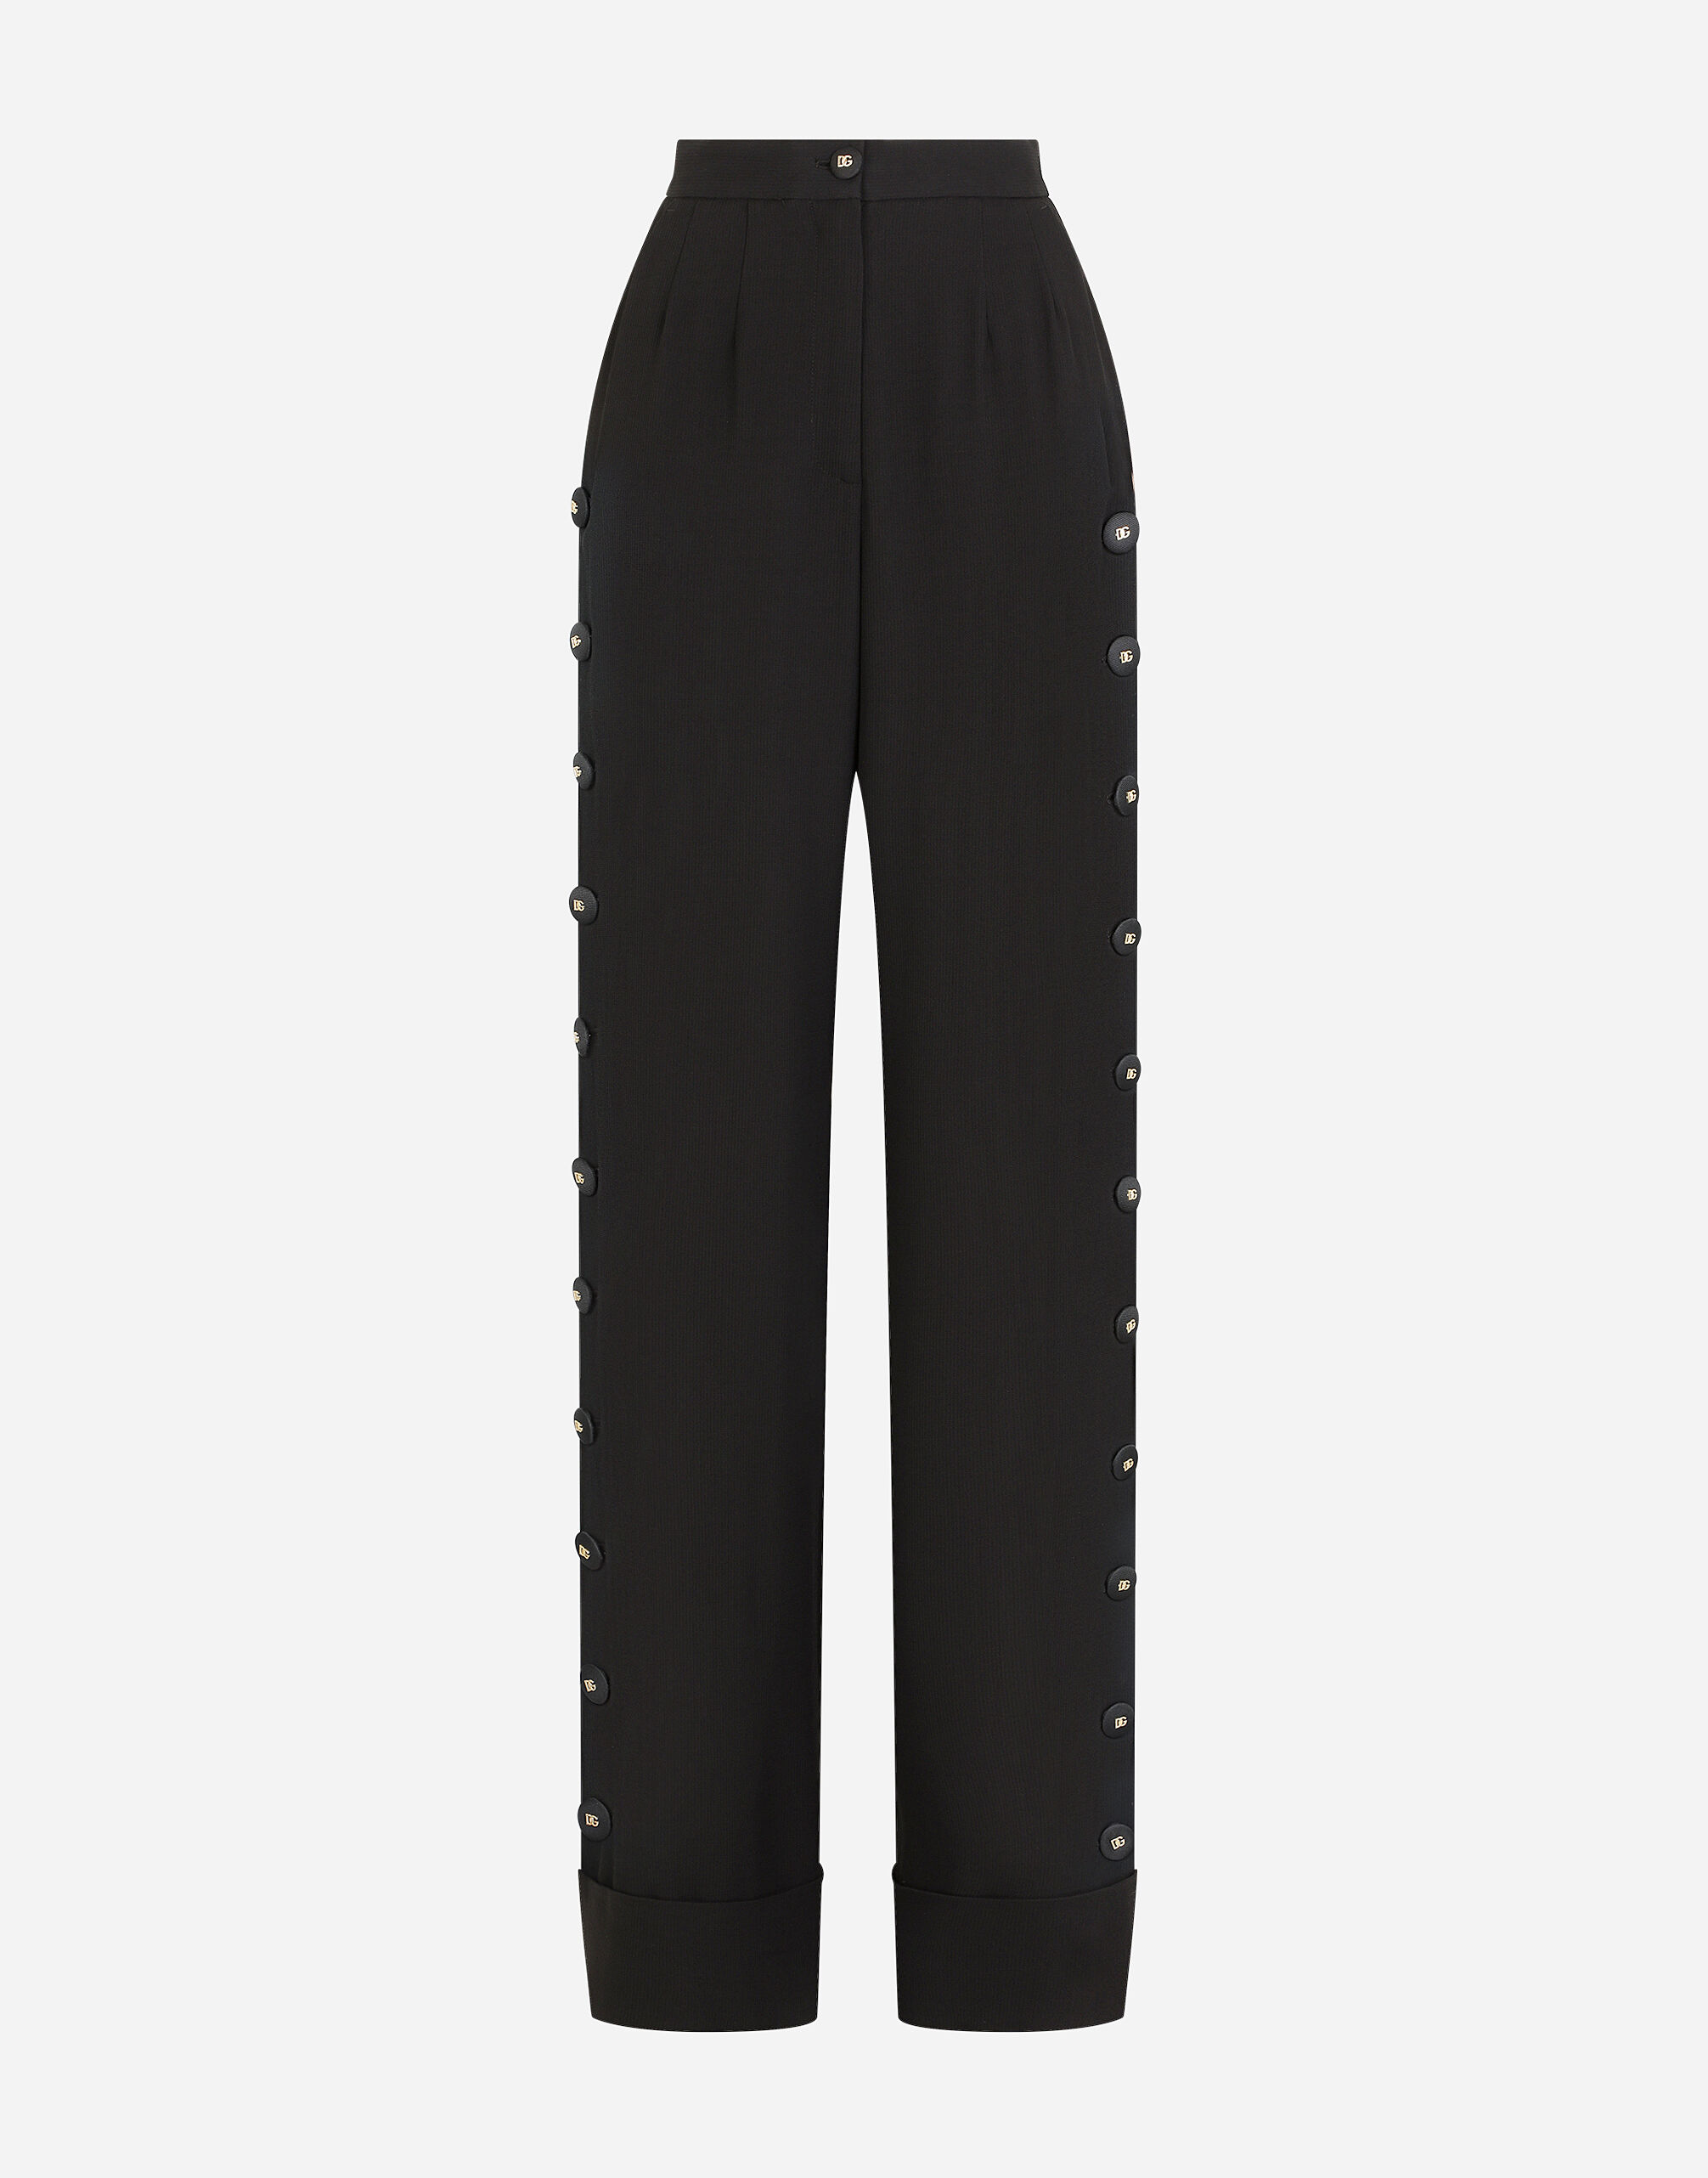 Dolce & Gabbana Piqué palazzo pants with buttons and turn-ups Black FX340ZJAIJ8